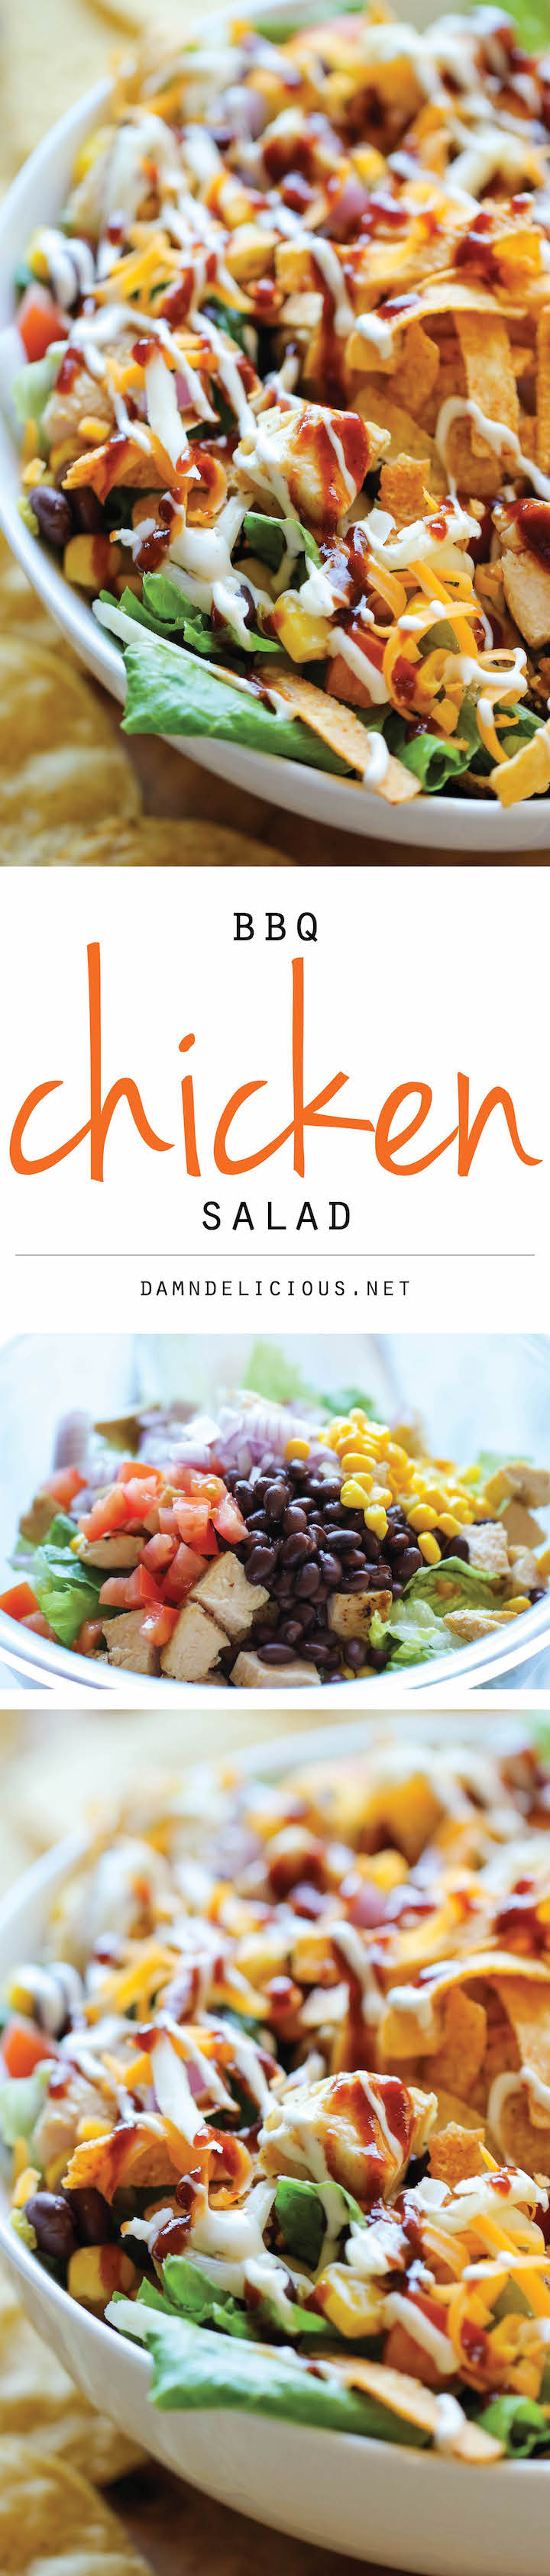 BBQ Chicken Salad - This healthy, flavorful salad comes together so quickly, and it is guaranteed to be a hit with your entire family!